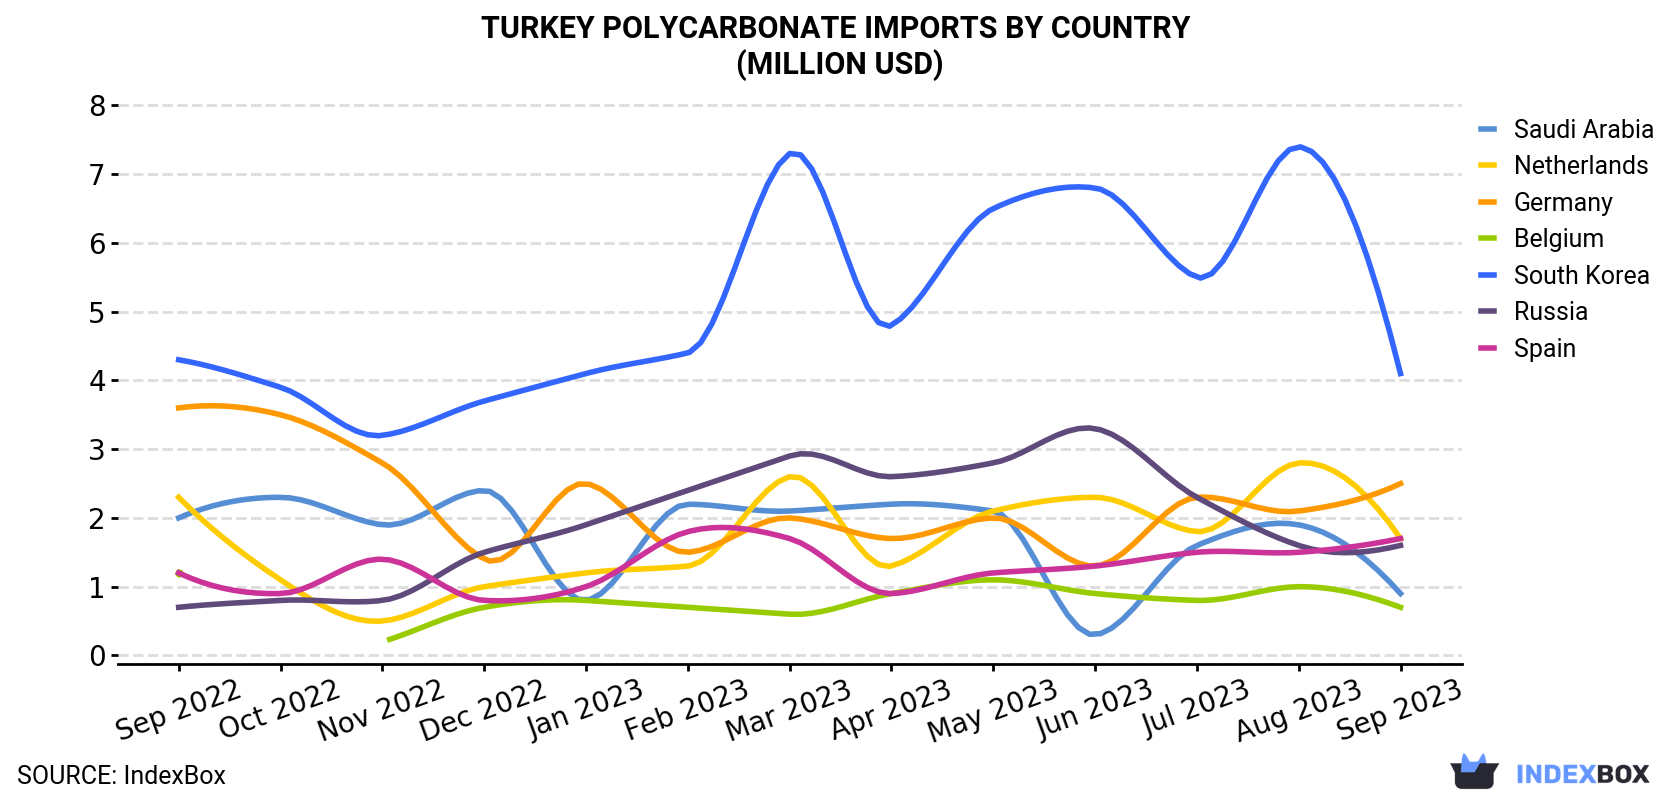 Turkey Polycarbonate Imports By Country (Million USD)